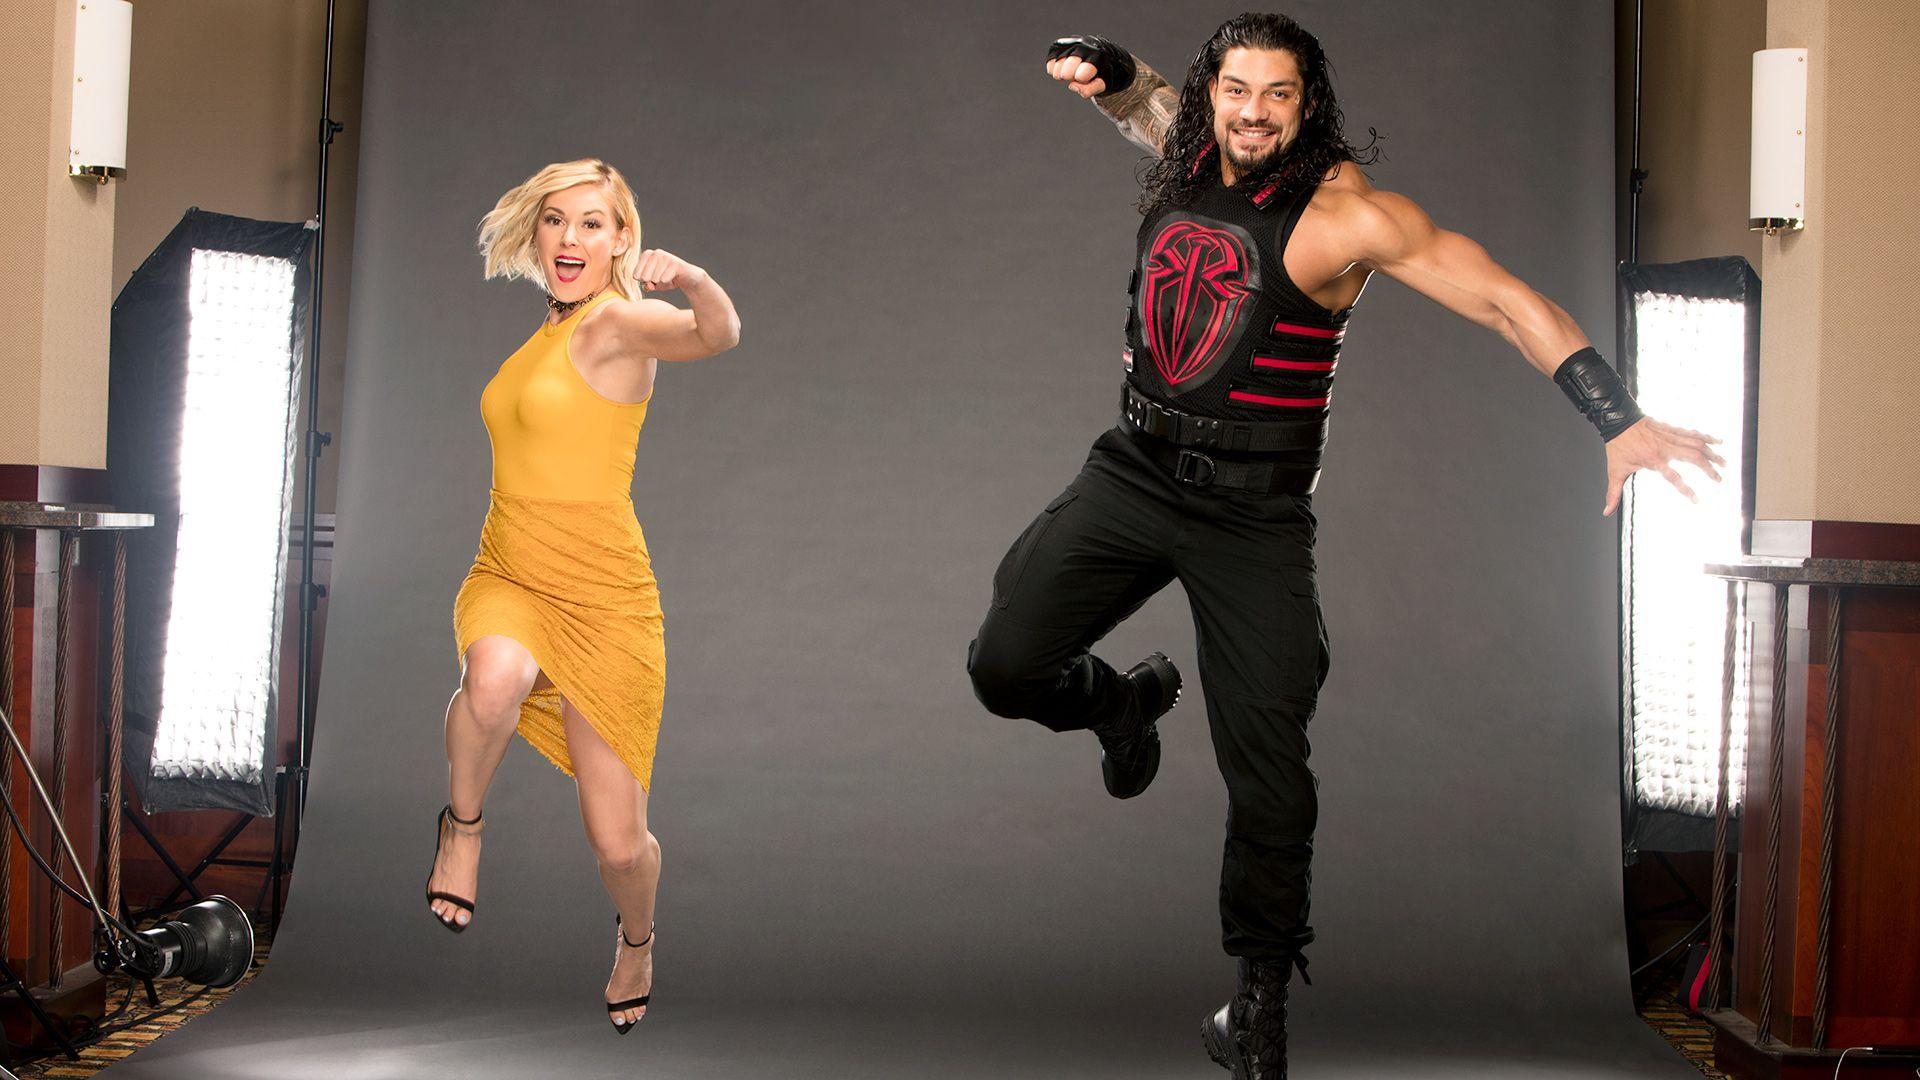 BattlePsBattle: WWE's Roman Reigns & Renee Young poses for a